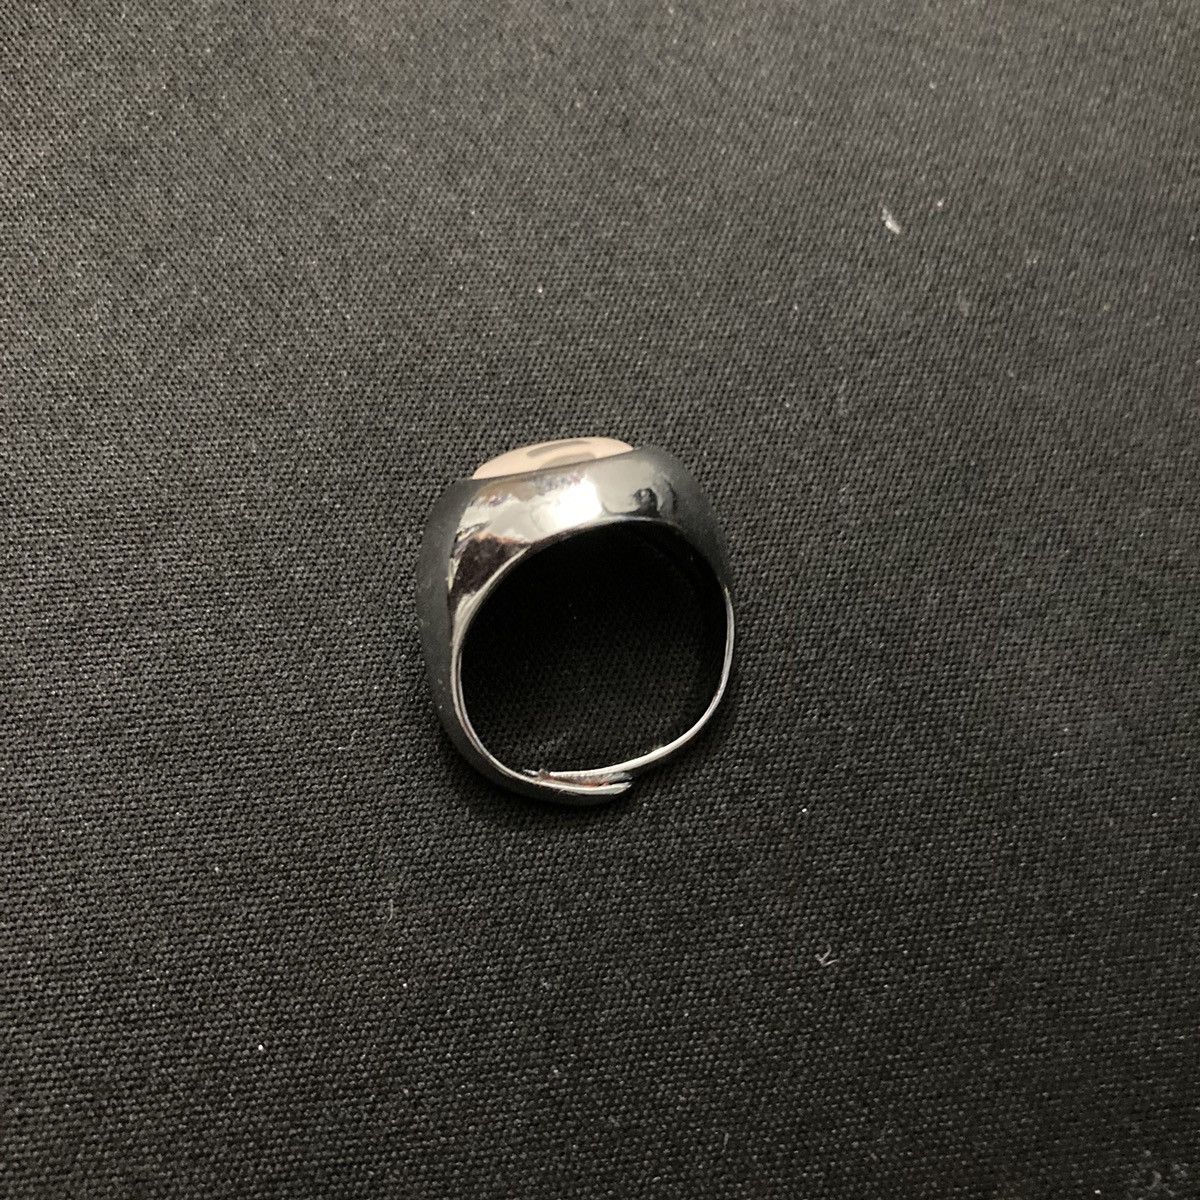 Vintage Stainless Steel Naruto Akatsuki Hidan Ring Adjustable Size Size ONE SIZE - 4 Preview